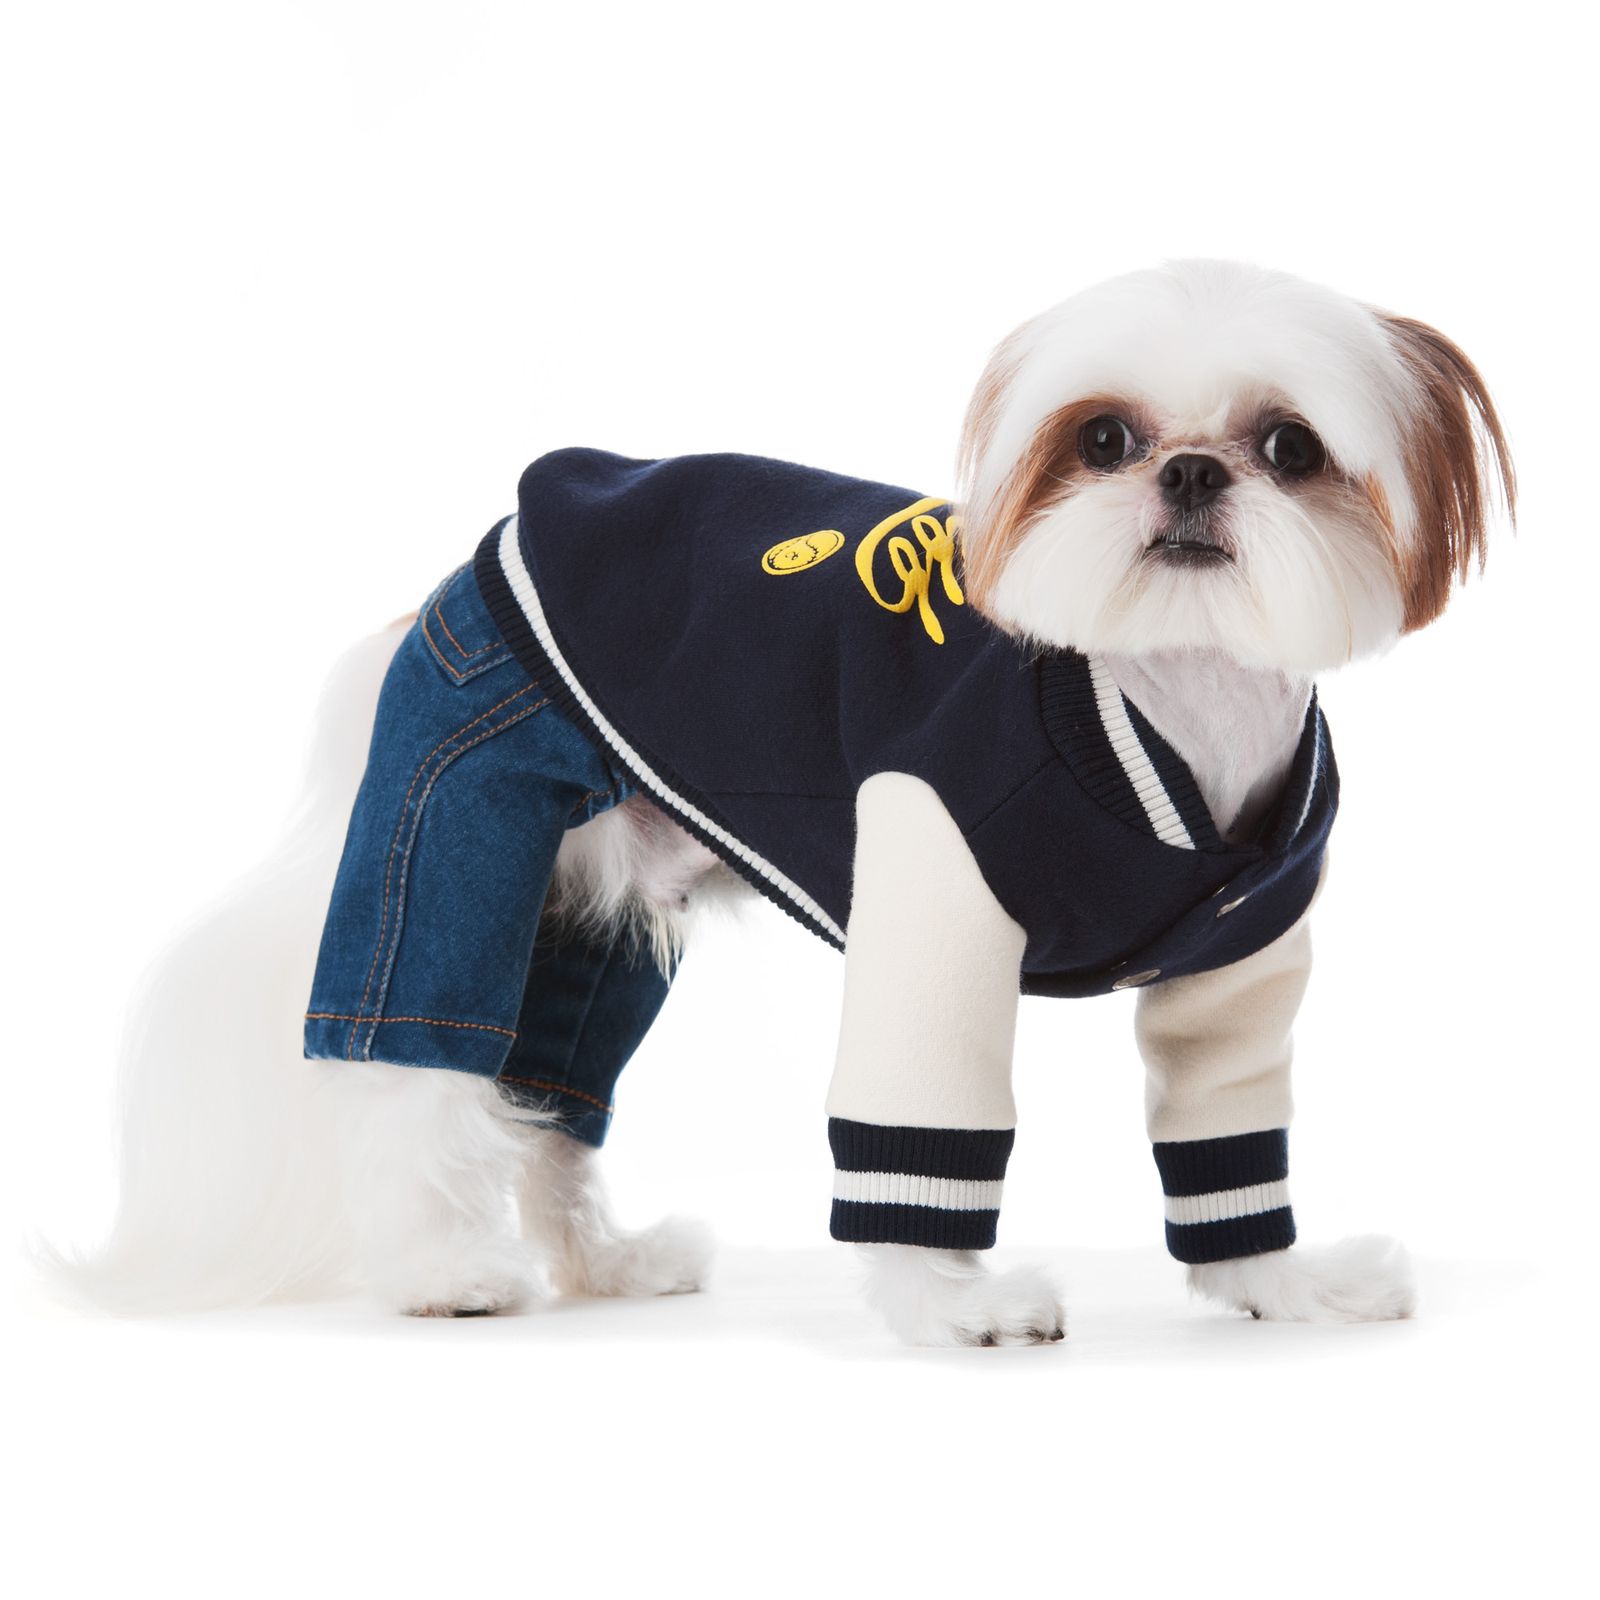 SNIFF BASEBALL JUMPER - DOGS CLOTHES